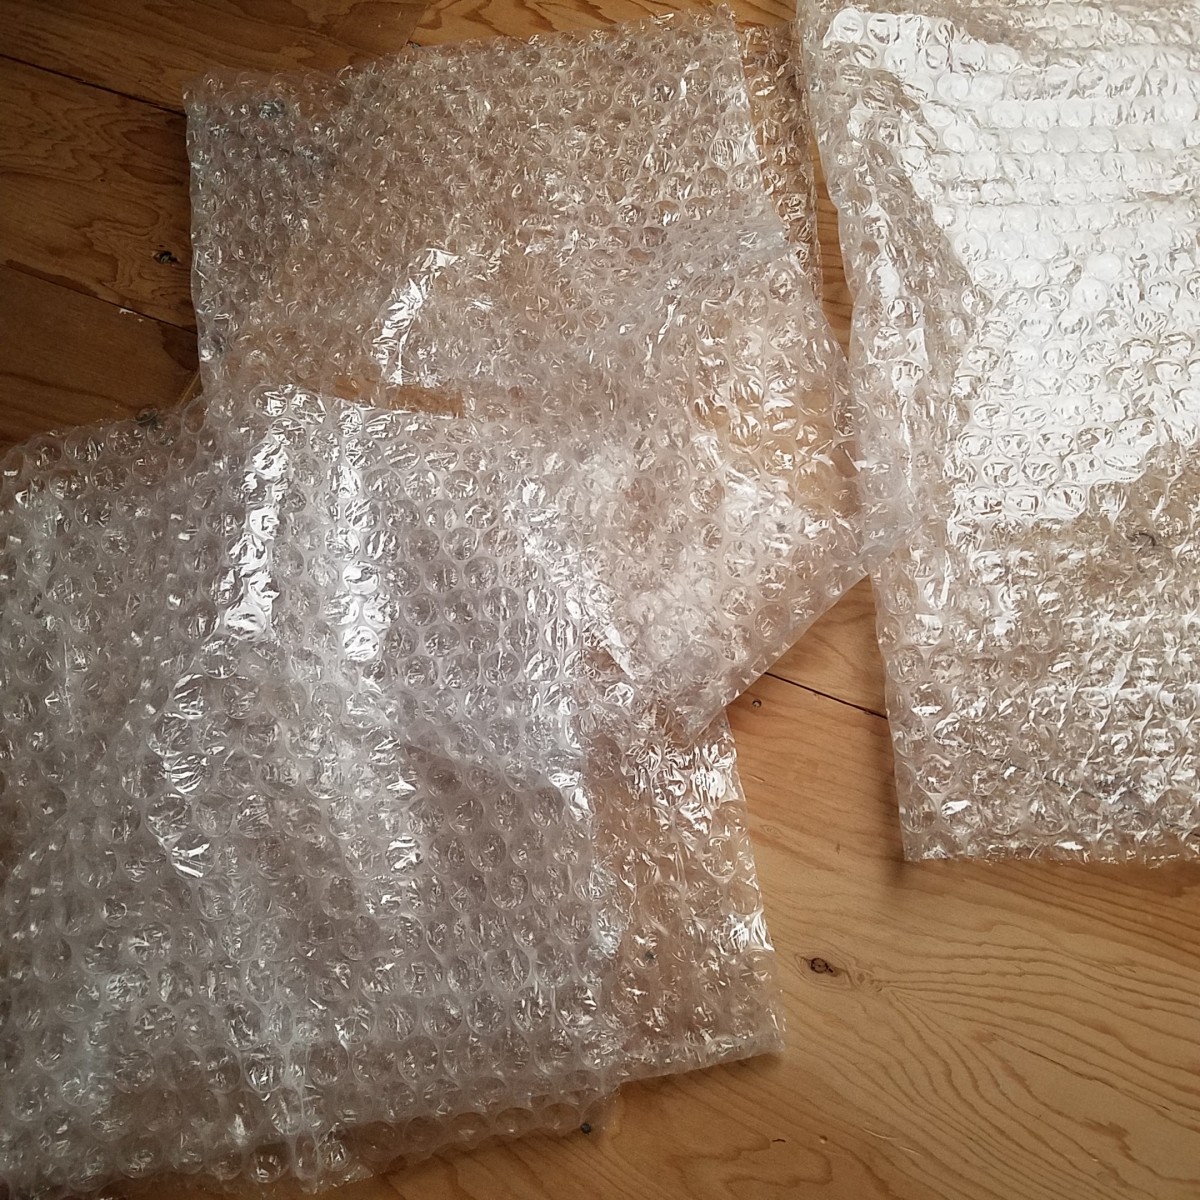 This bubble wrap came with my mother's paintings when she sent them to us.  Our attic has space for us to have fun rolling around on it.